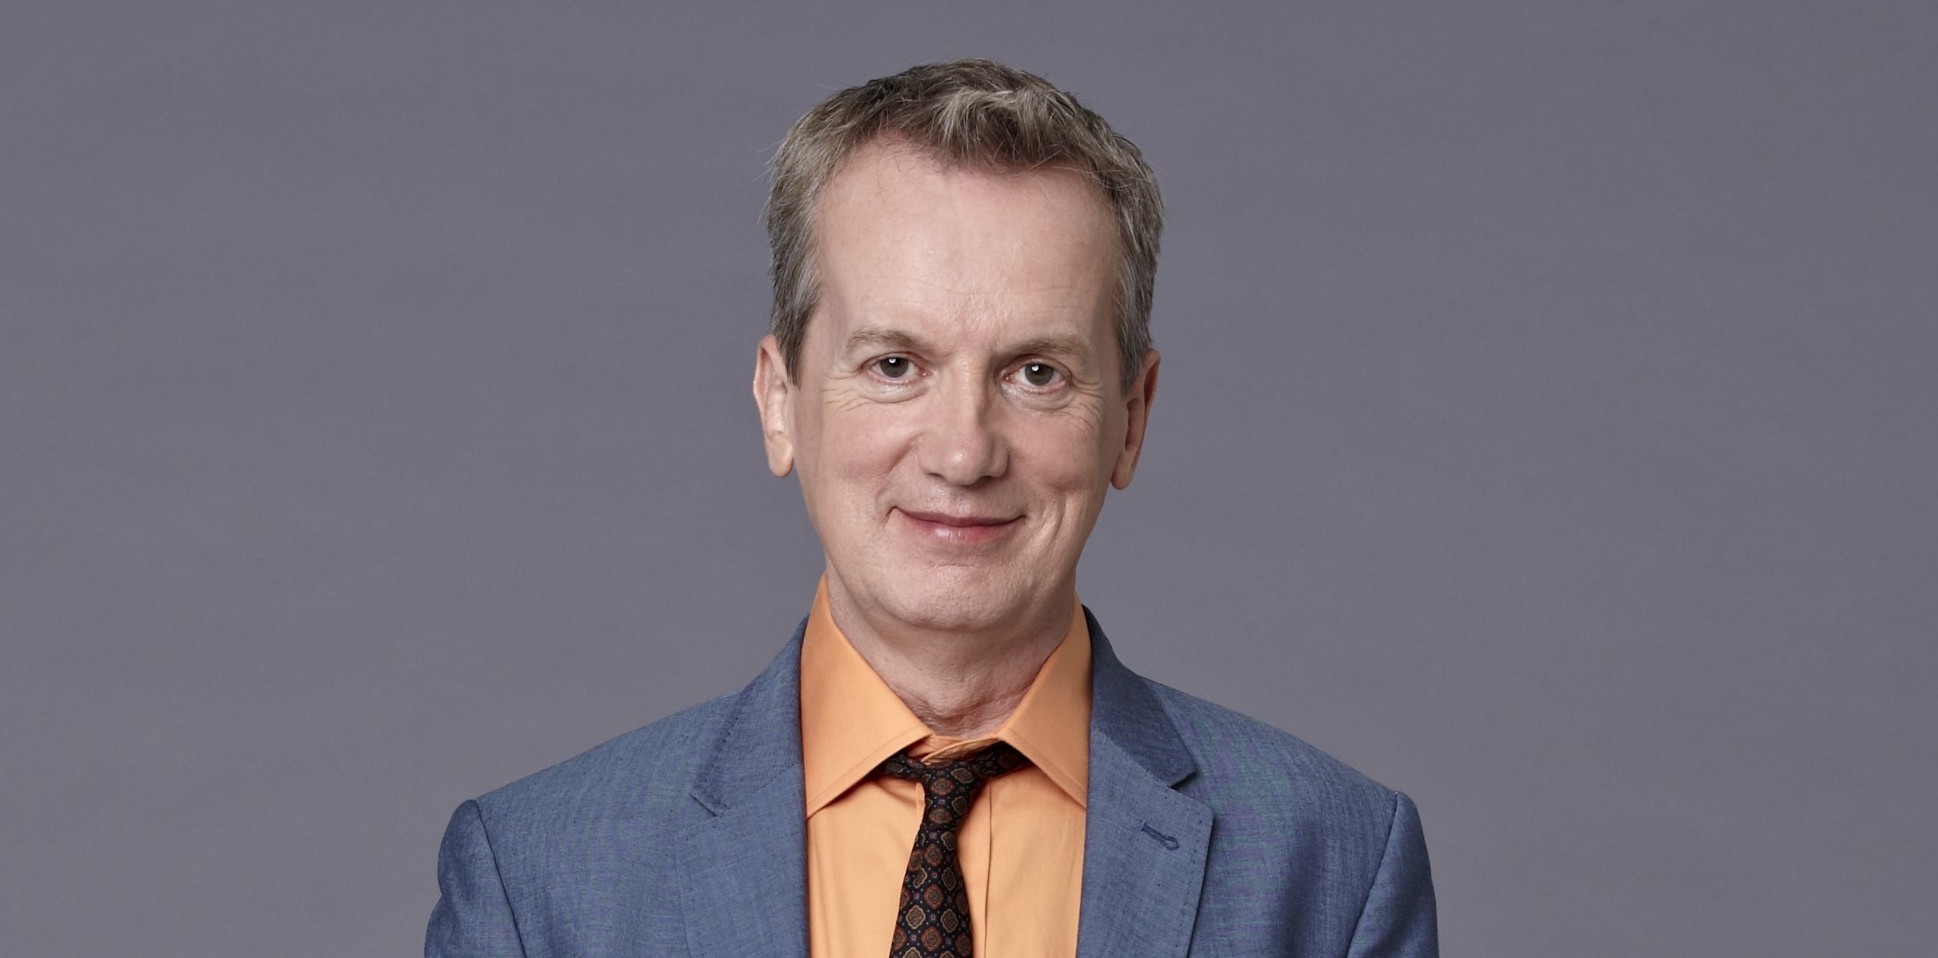 TX DATE ANNOUNCED FOR FRANK SKINNER’S BRAND NEW COMEDY PANEL SHOW, THE REST IS HISTORY